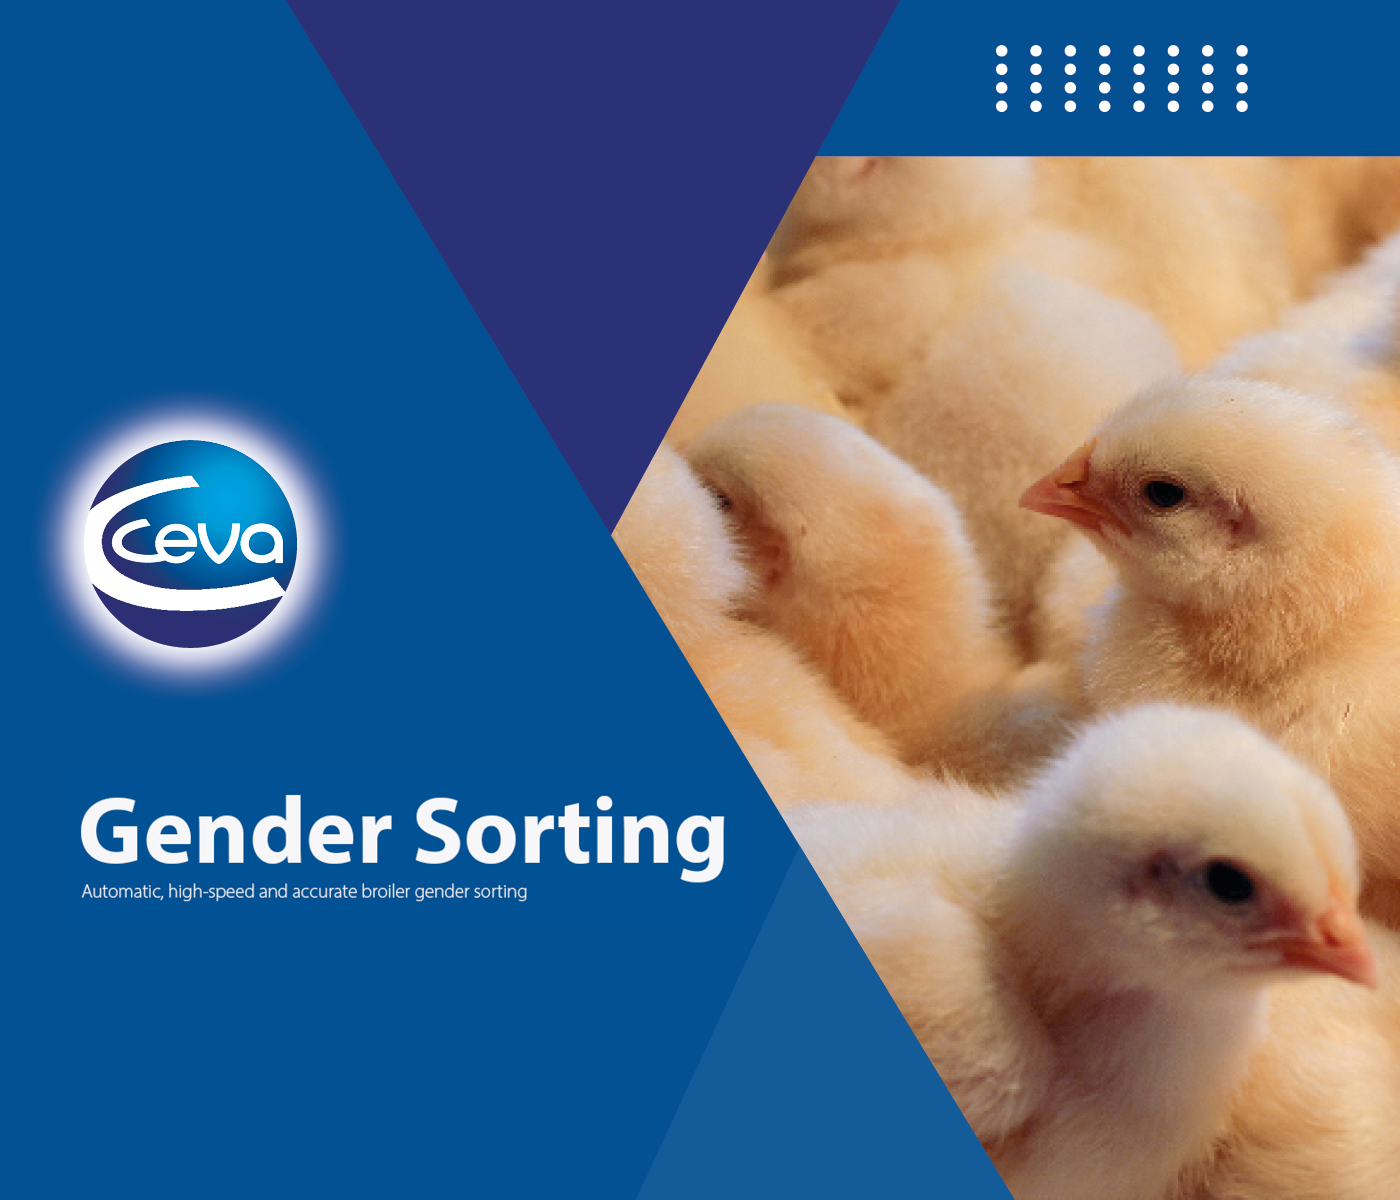 Ceva Santé Animale brings innovation at the hatchery with a day-old-chick Gender Sorting equipment for broiler producers